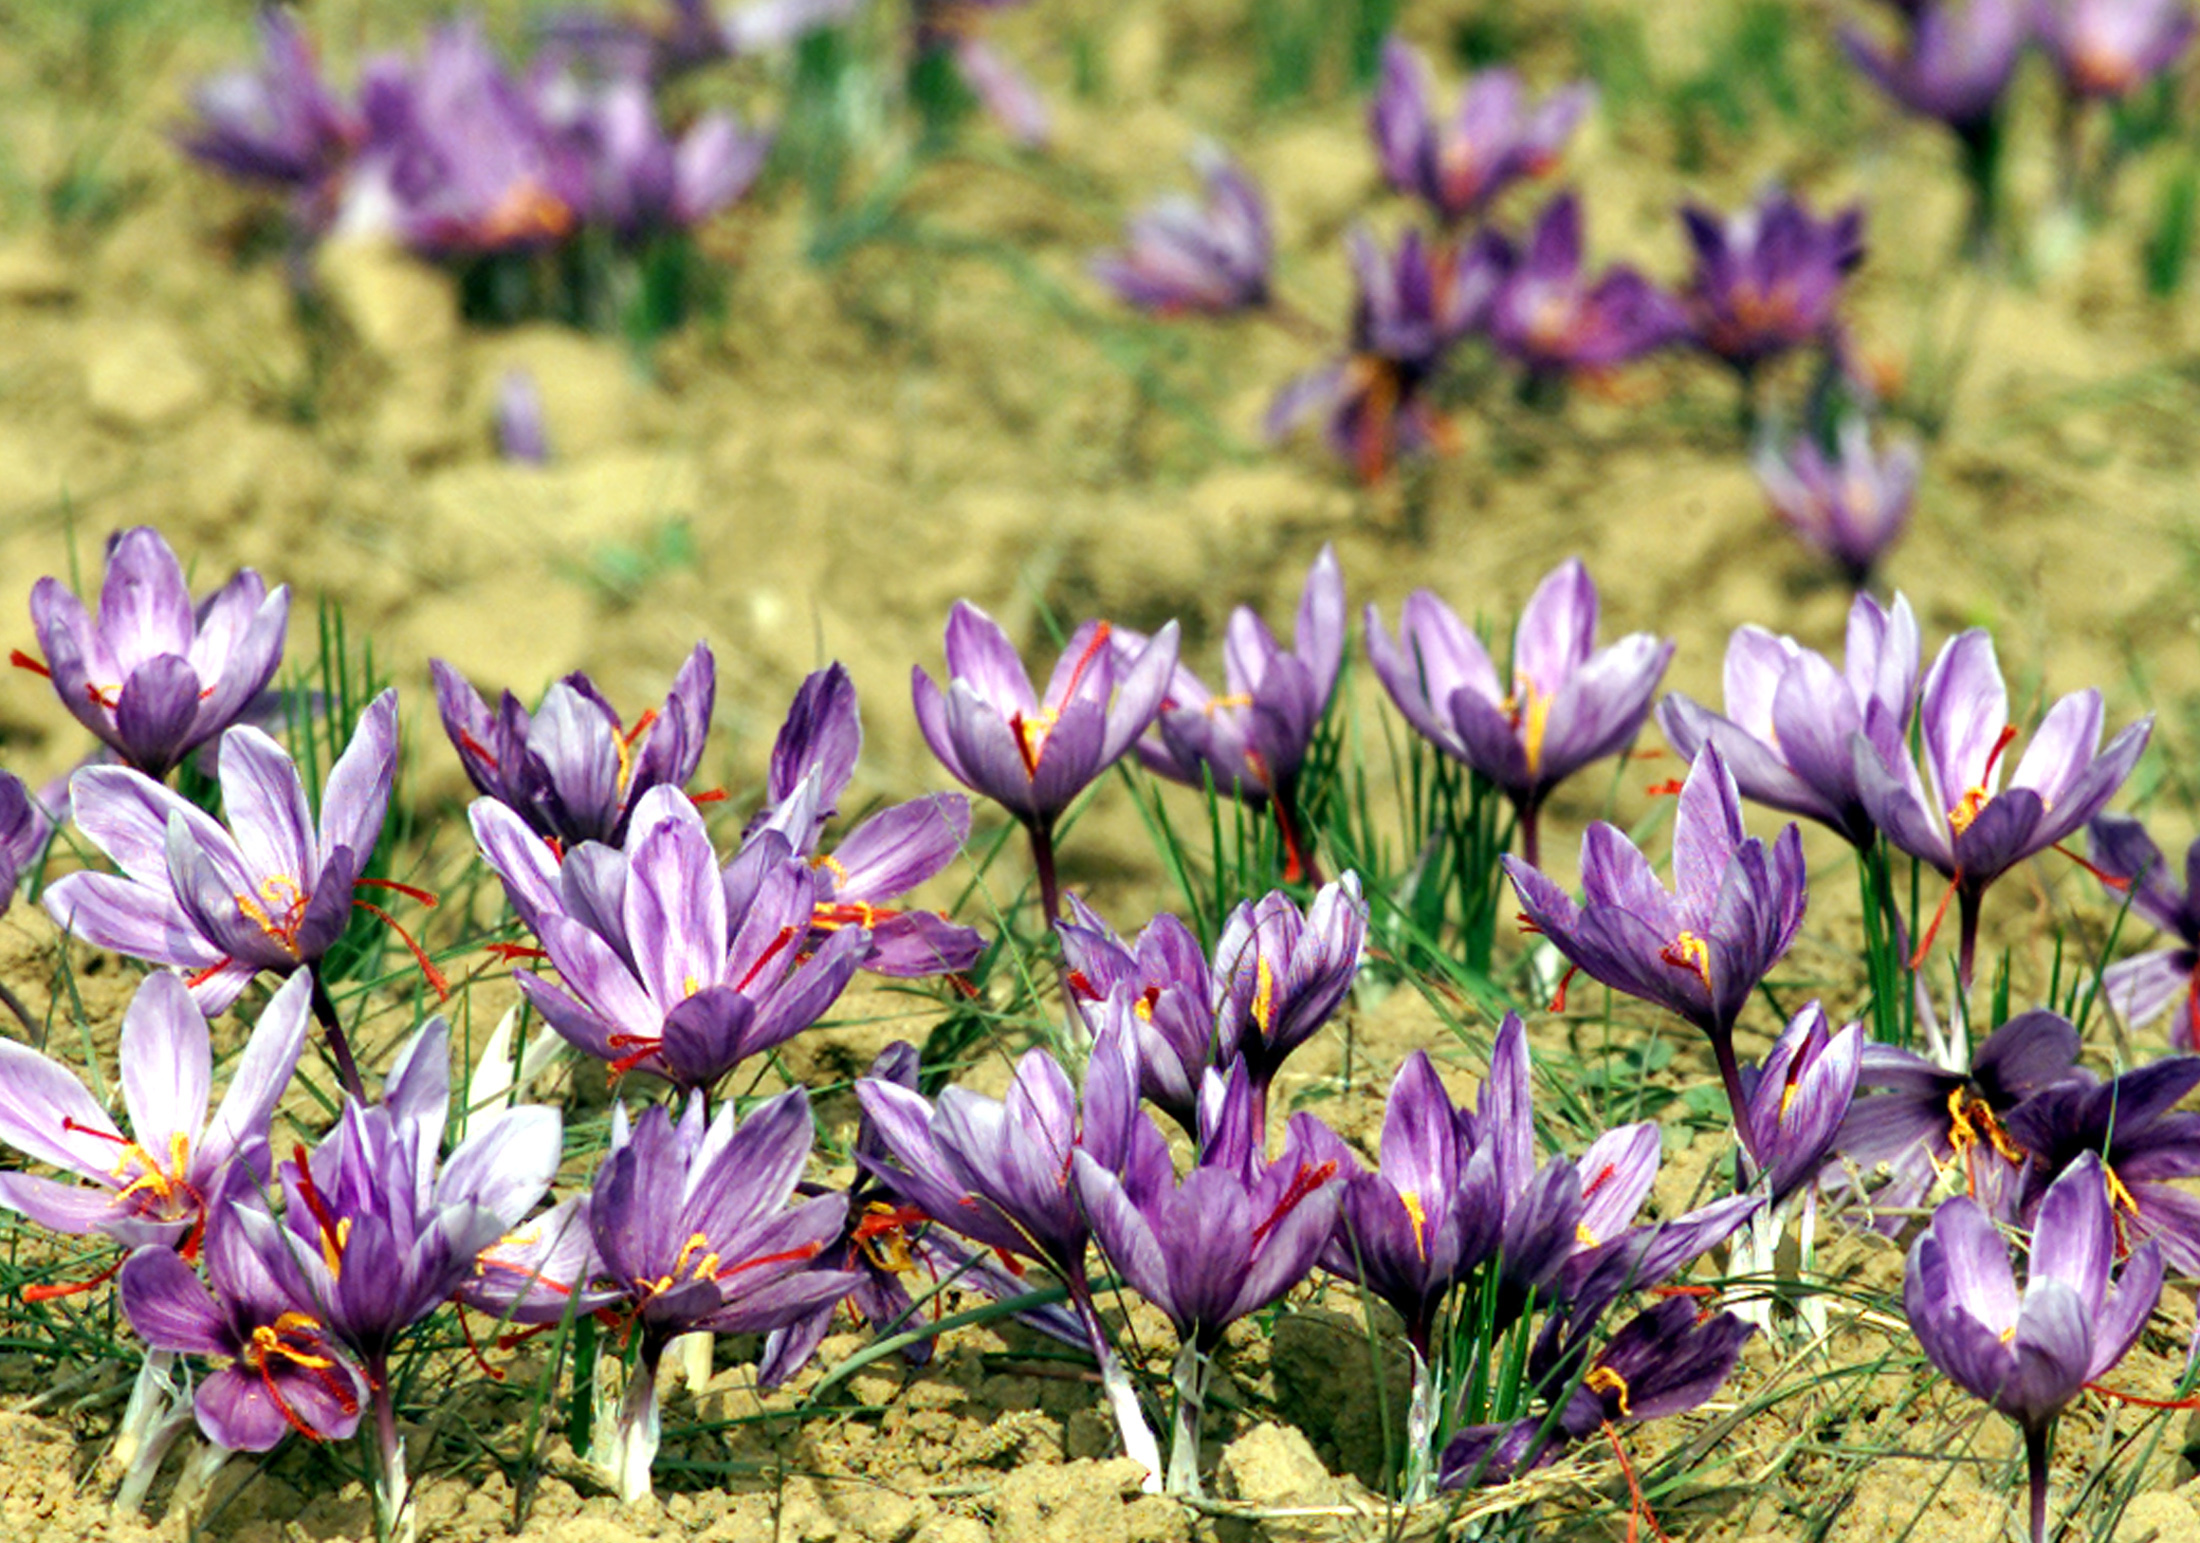 FOR USE WITH FEATURE STORY KASHMIR SAFFRON.